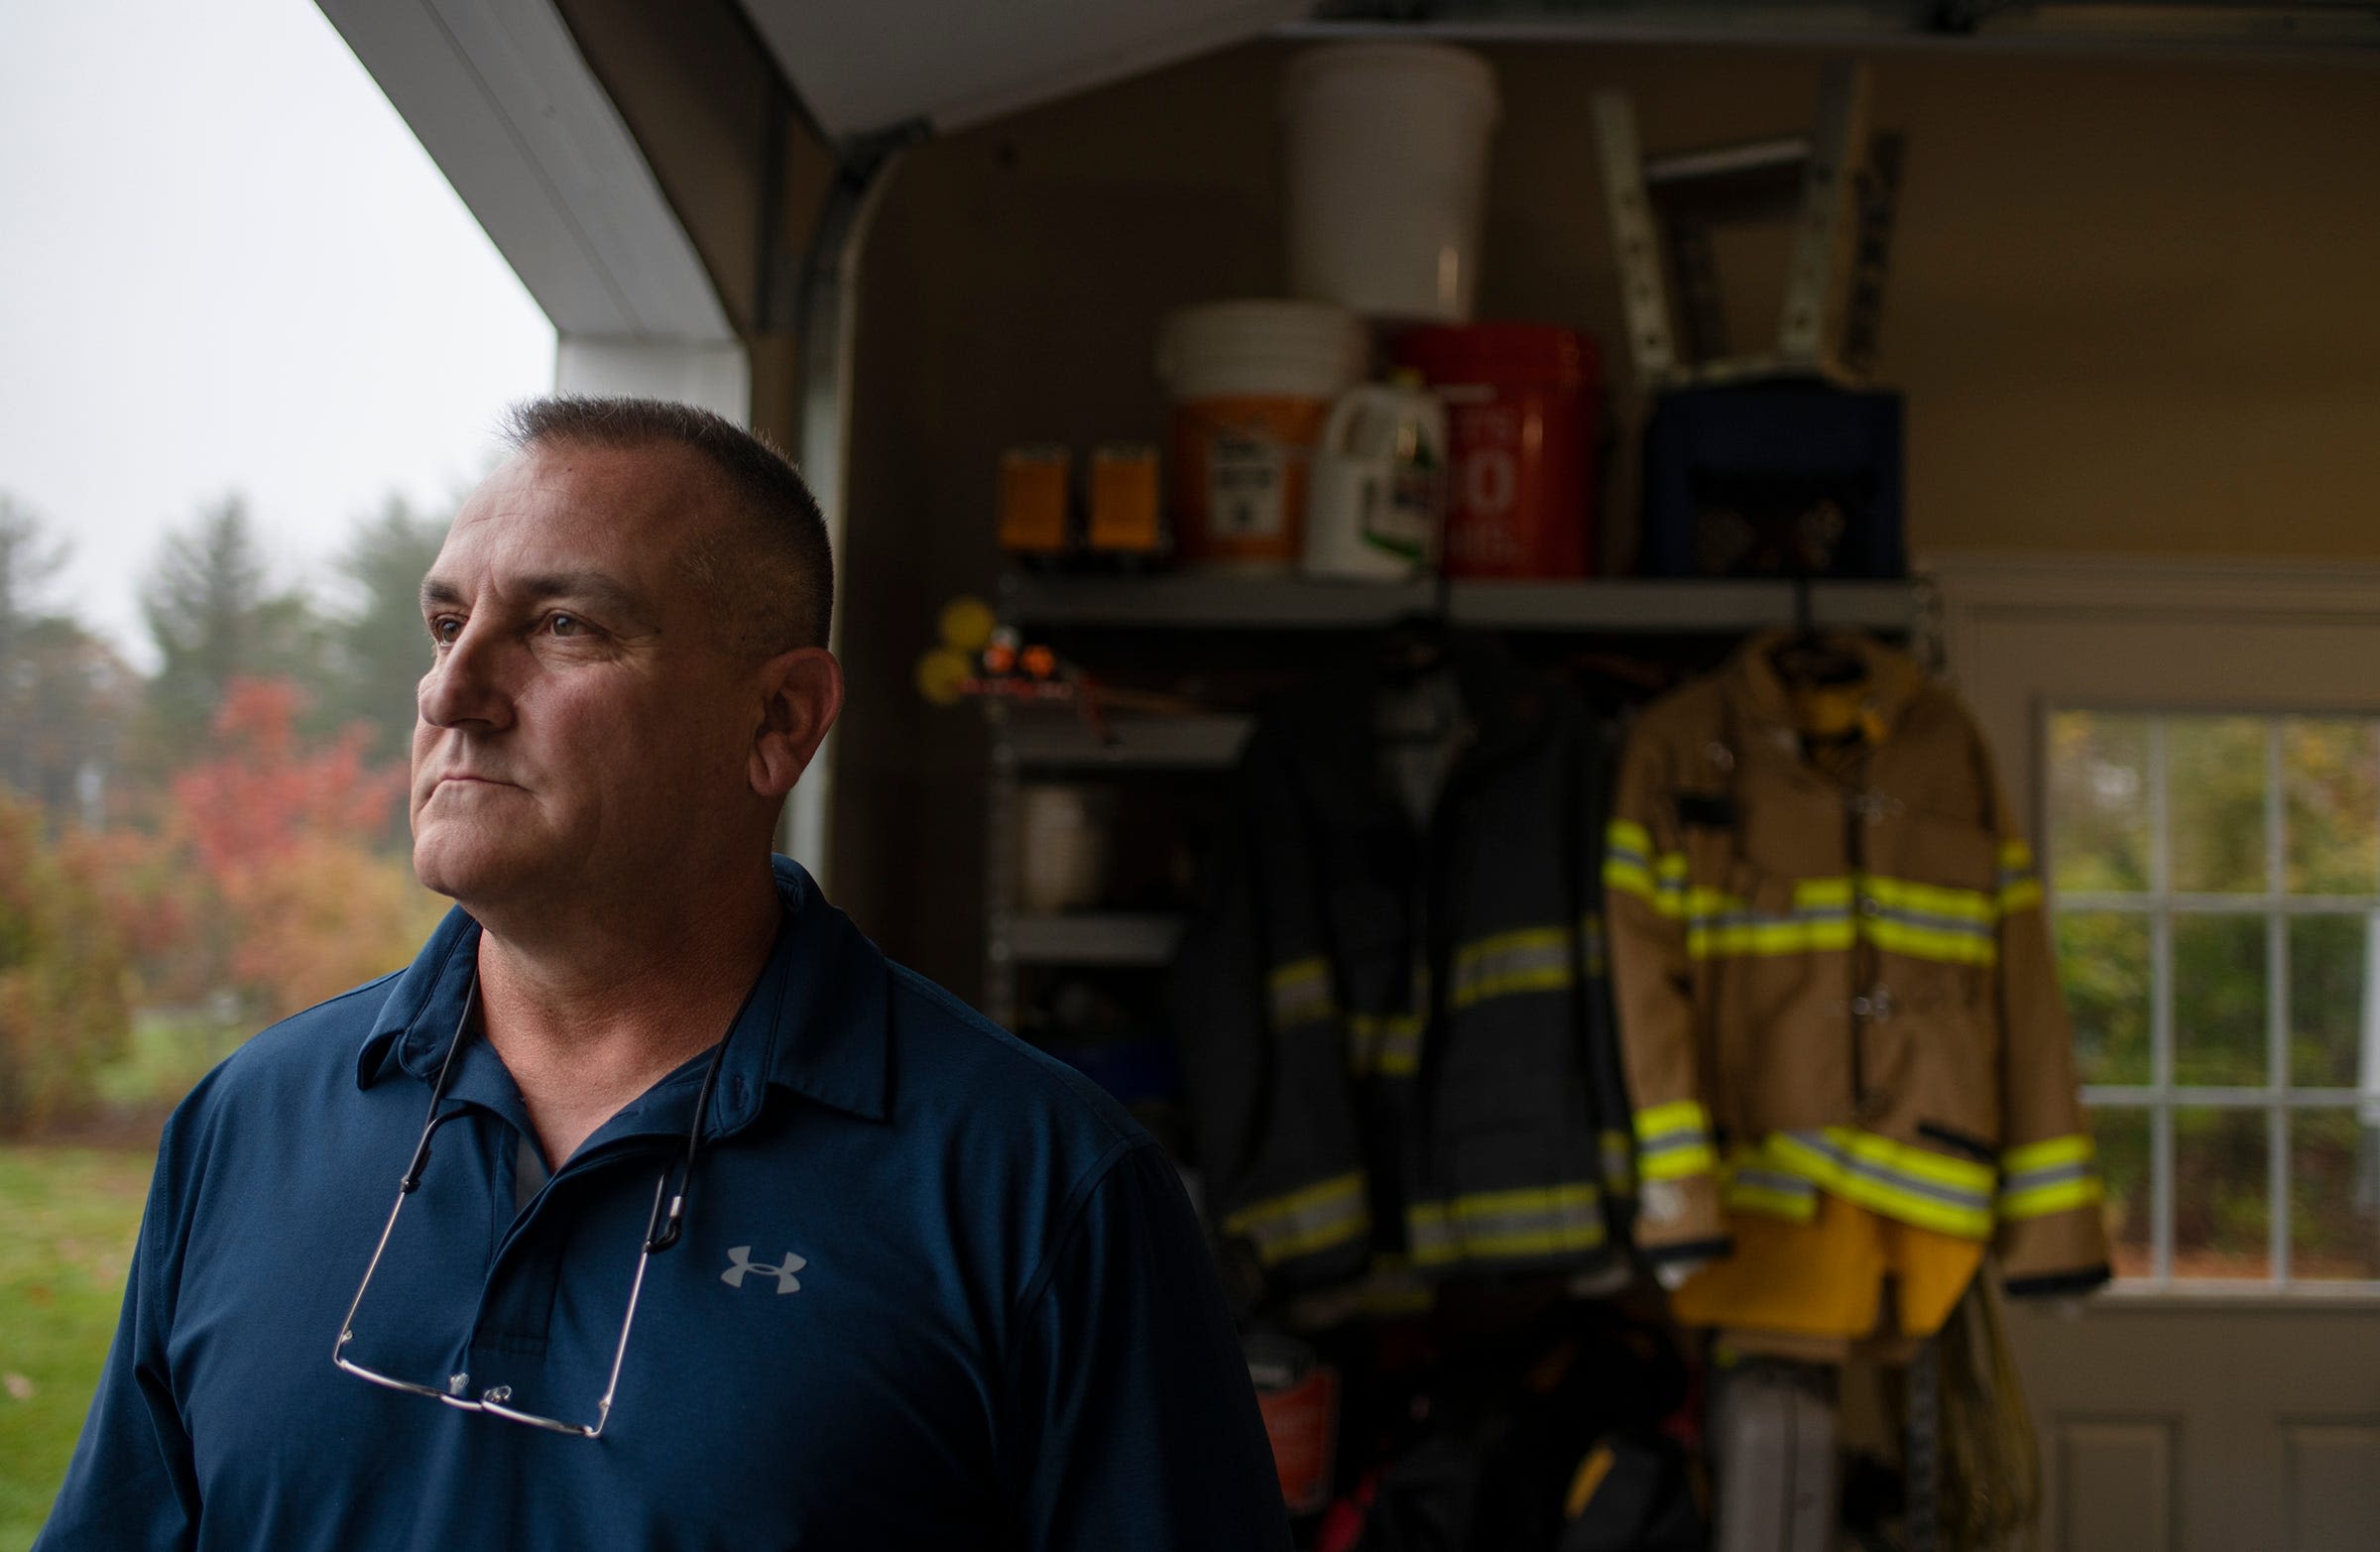 MA Senate passes ban on PFAS in firefighter turnout gear. Will House act?